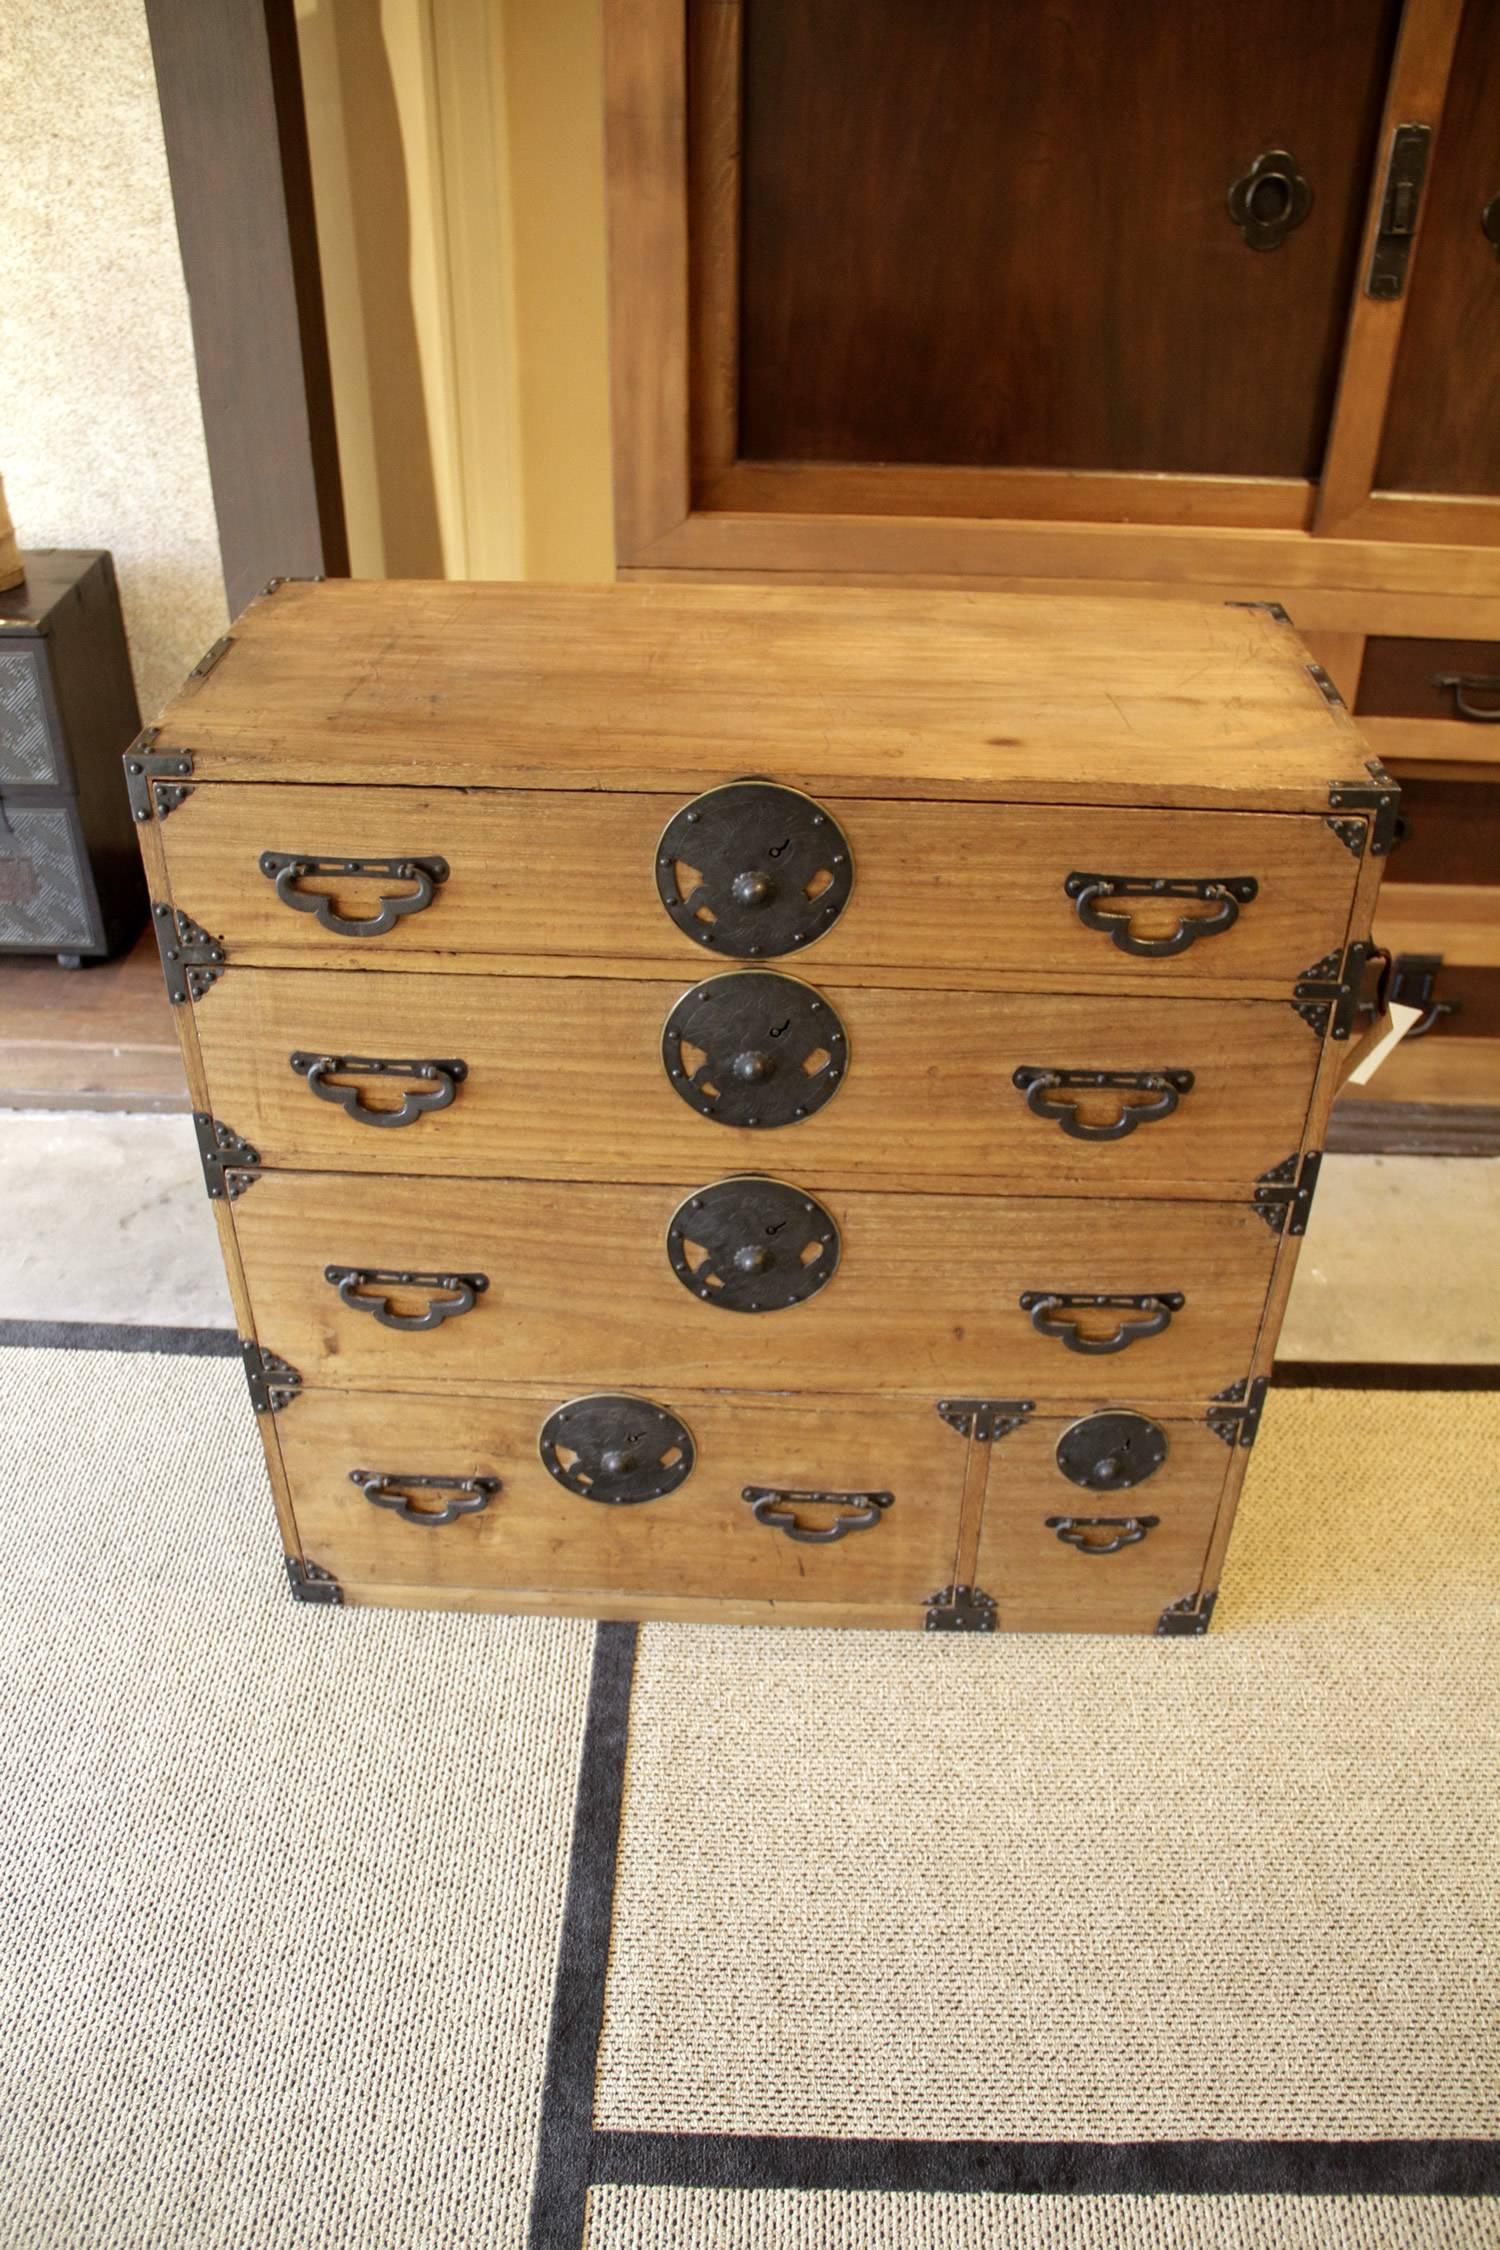 This Japanese Tansu chest has round iron hardware that is from the 19th century, circa
1890s-1900s. It is a one section tansu made of Paulownia or Kiri wood. This clothing chest or “Tansu” in Japanese a crane image carved into the metal